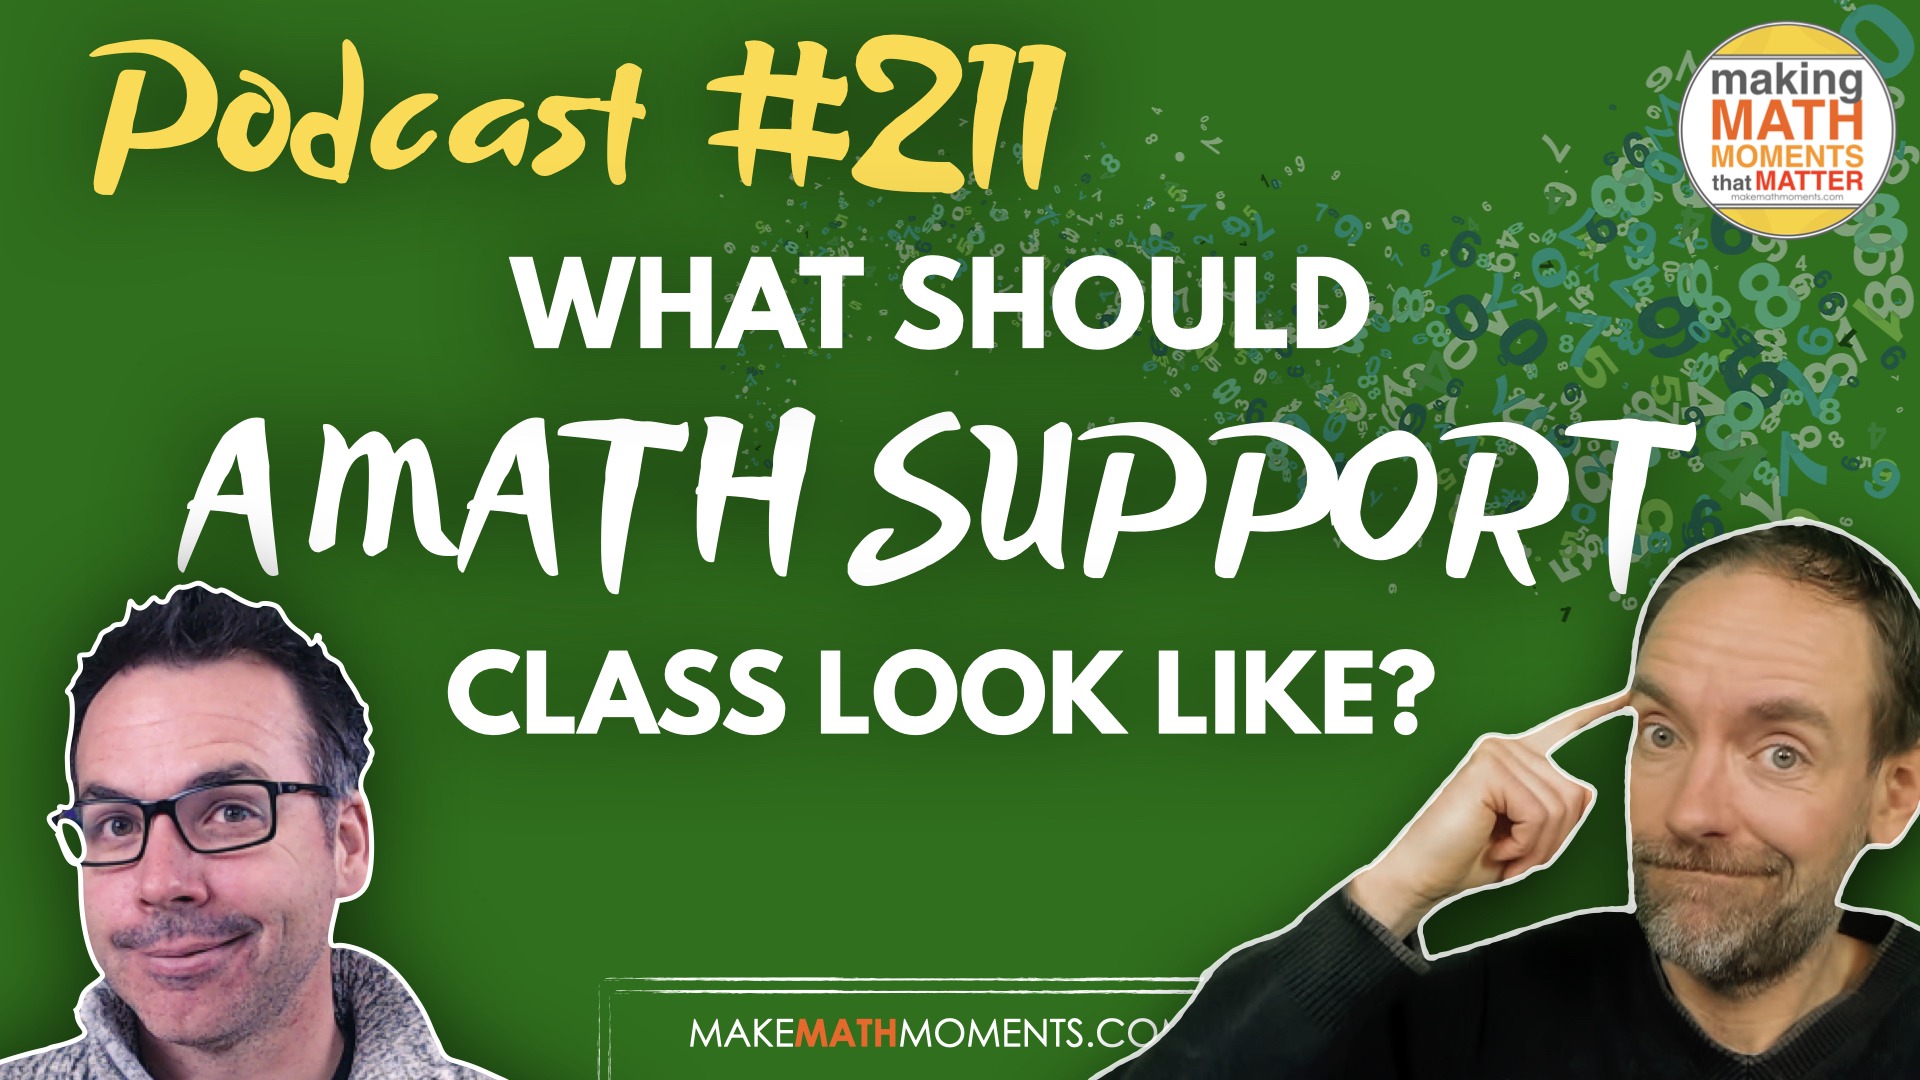 Episode #211: What Should a Math Support Class Look Like? – A Math Mentoring Moment